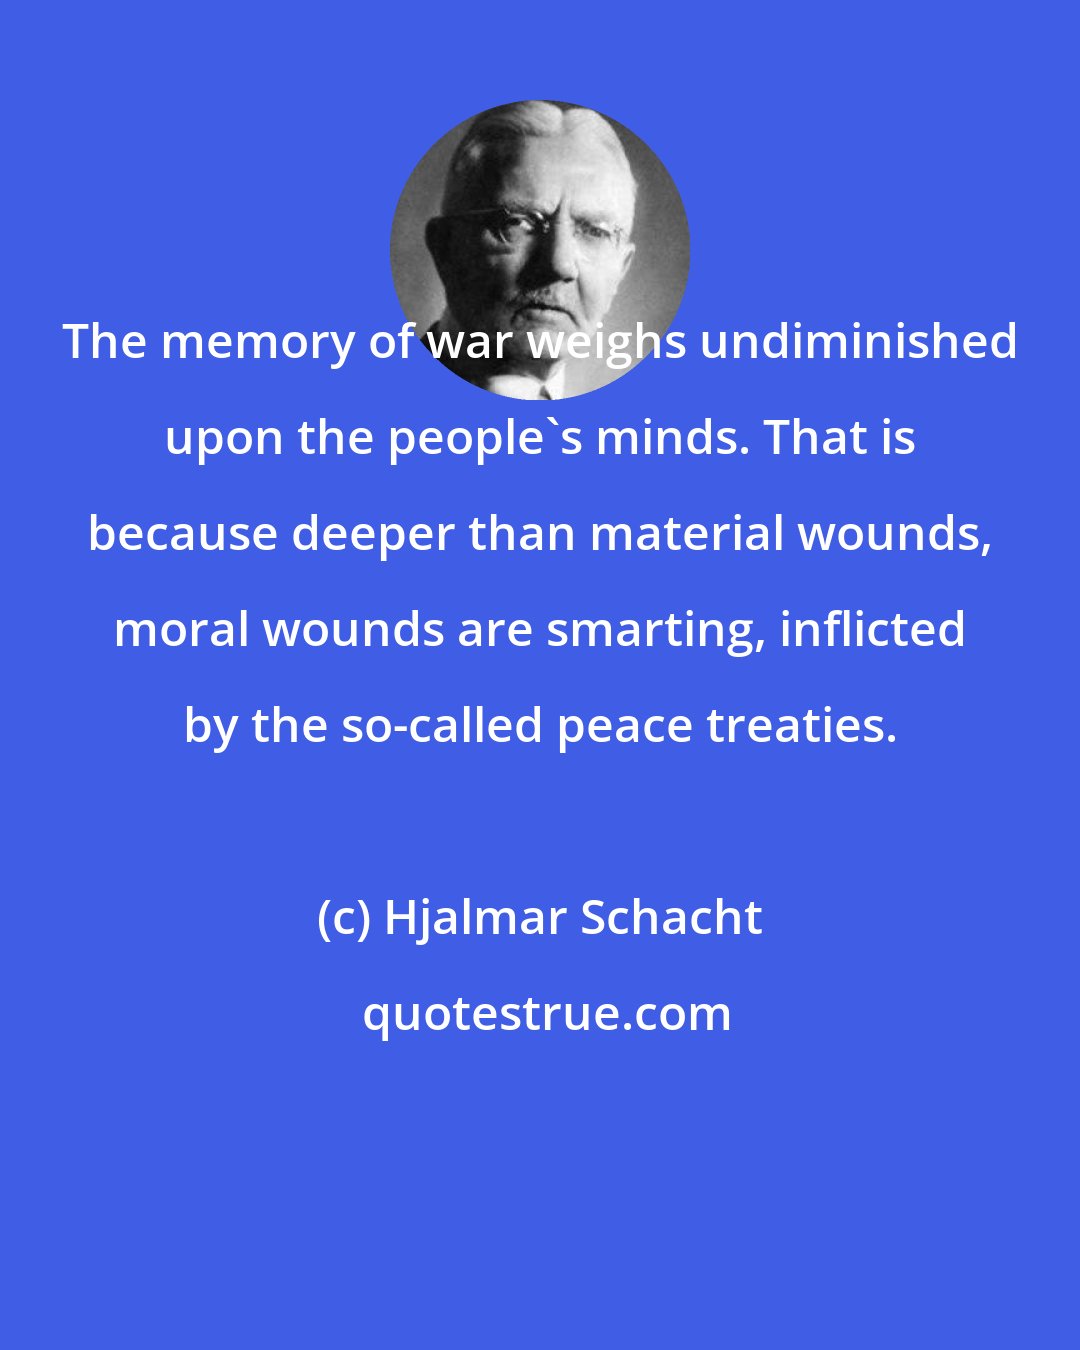 Hjalmar Schacht: The memory of war weighs undiminished upon the people's minds. That is because deeper than material wounds, moral wounds are smarting, inflicted by the so-called peace treaties.